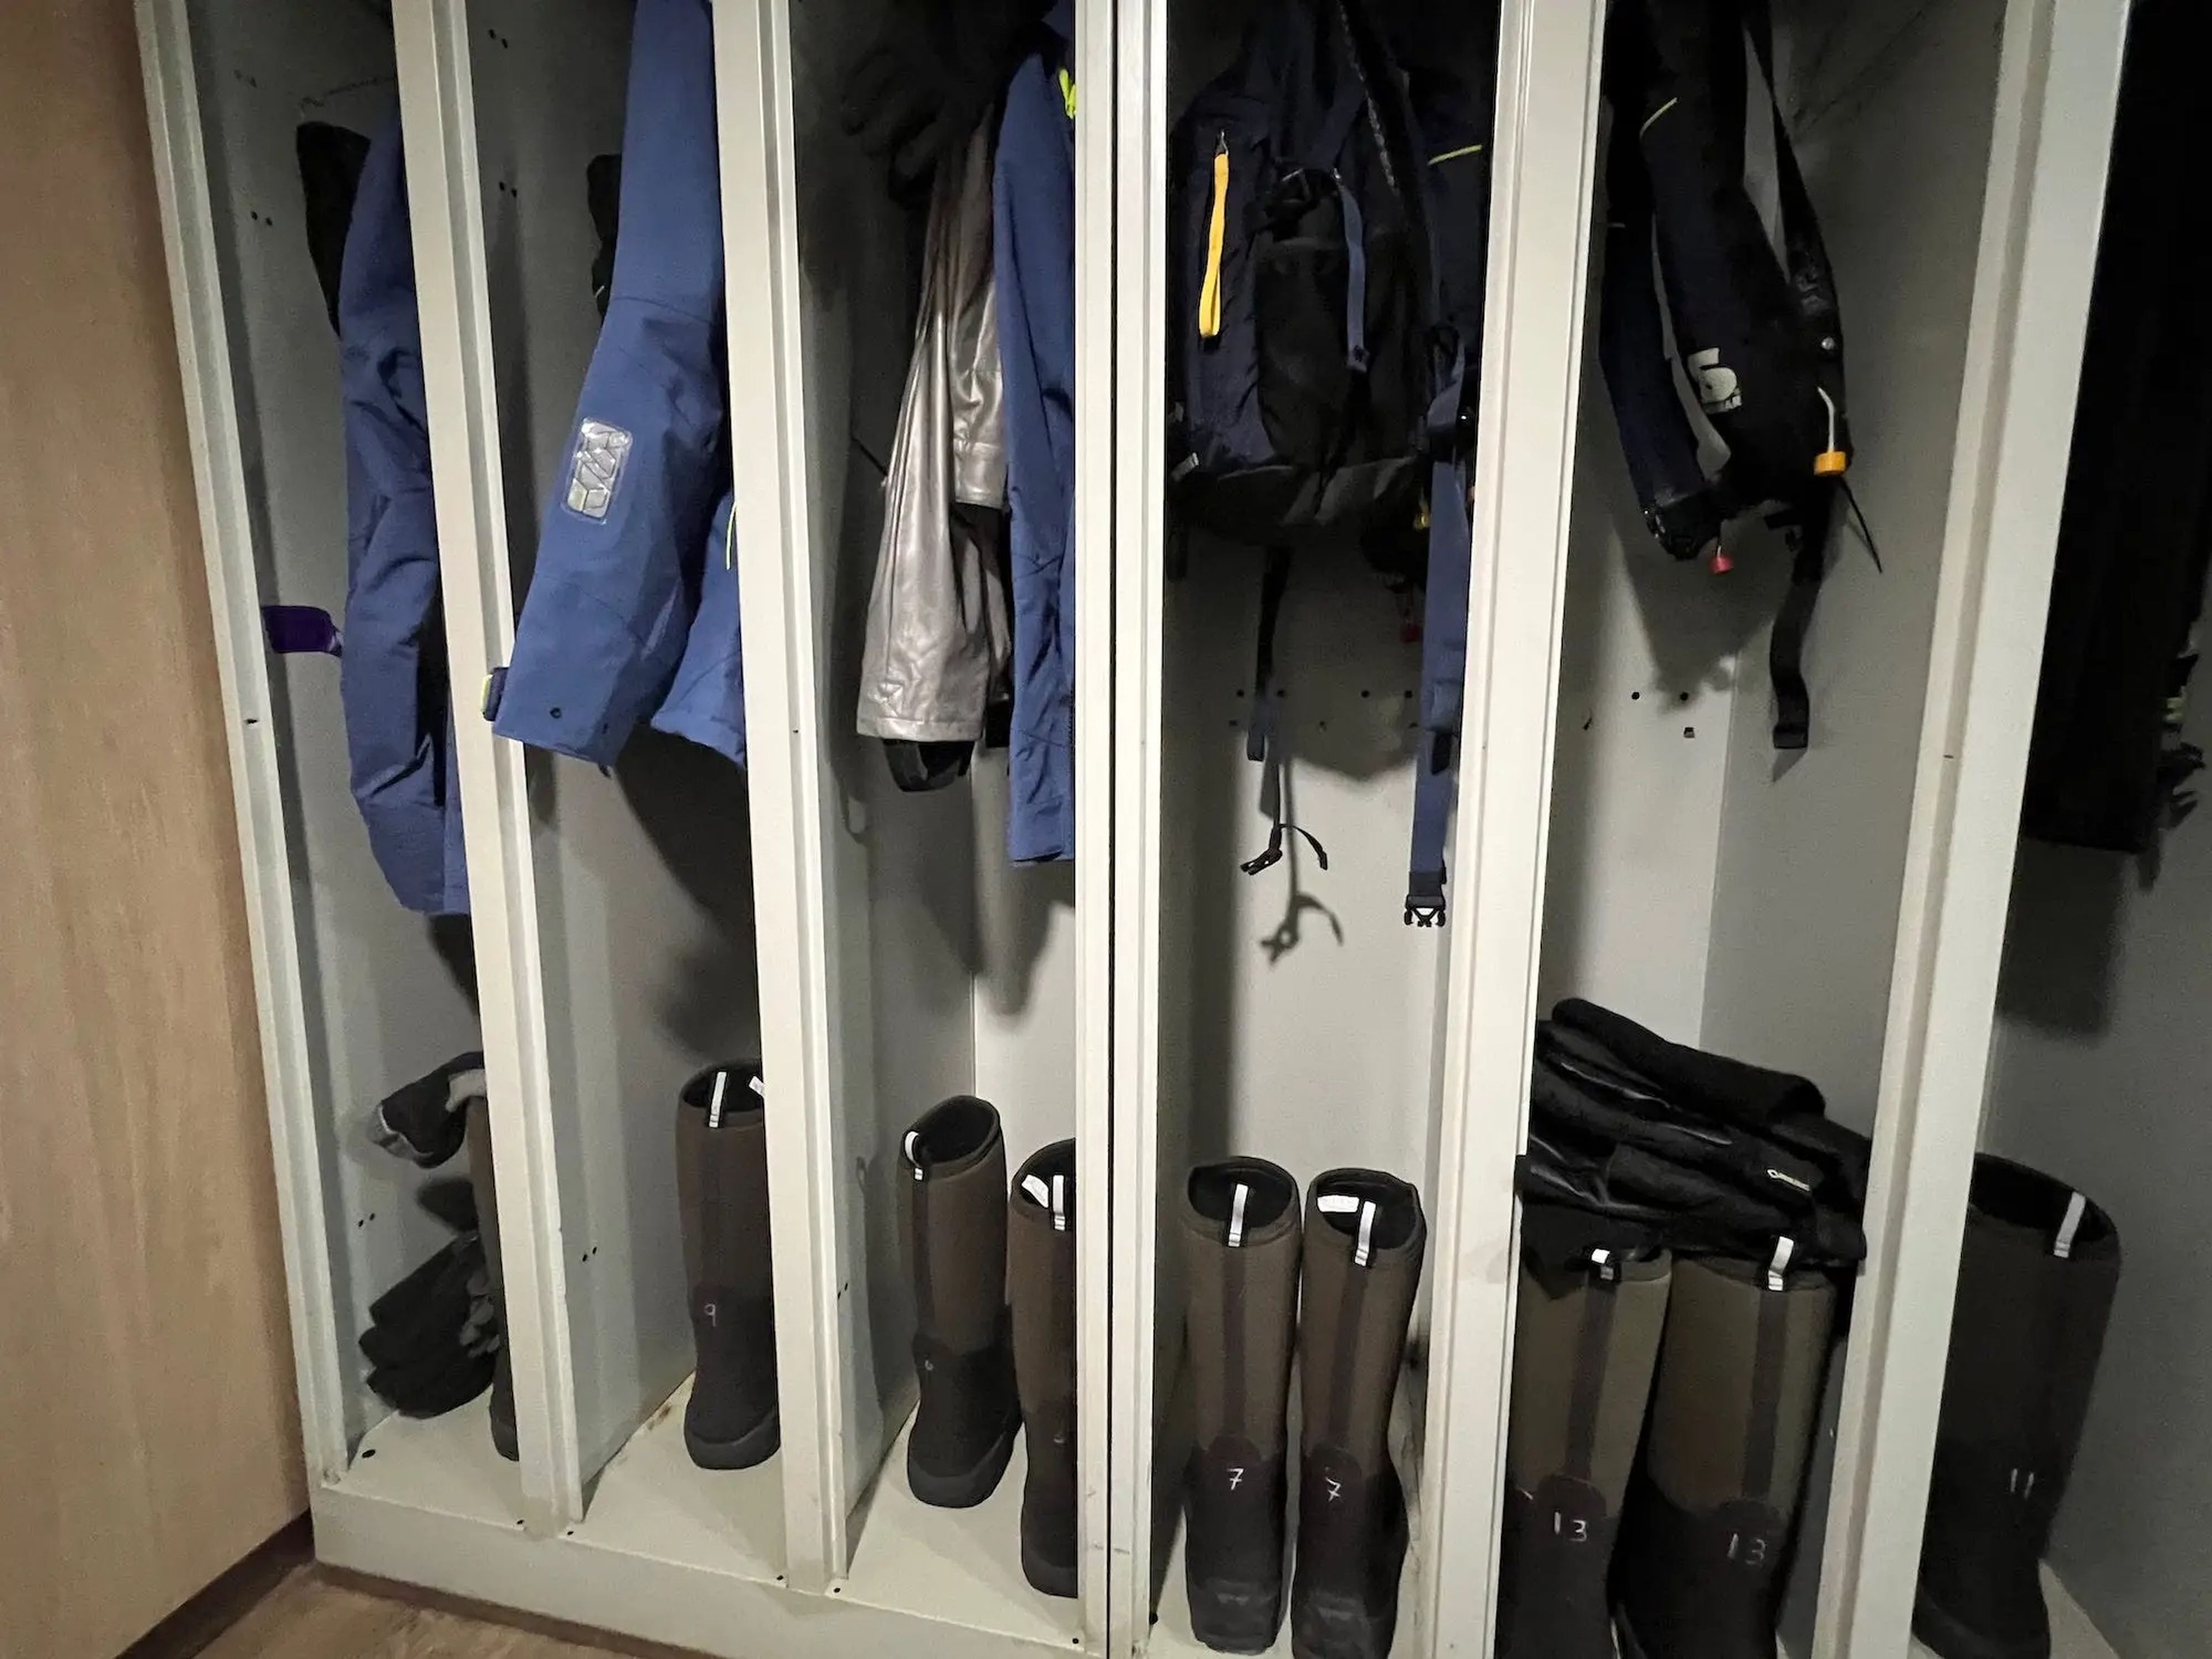 Parkas, muck boots, and backpacks in the mud room lockers.